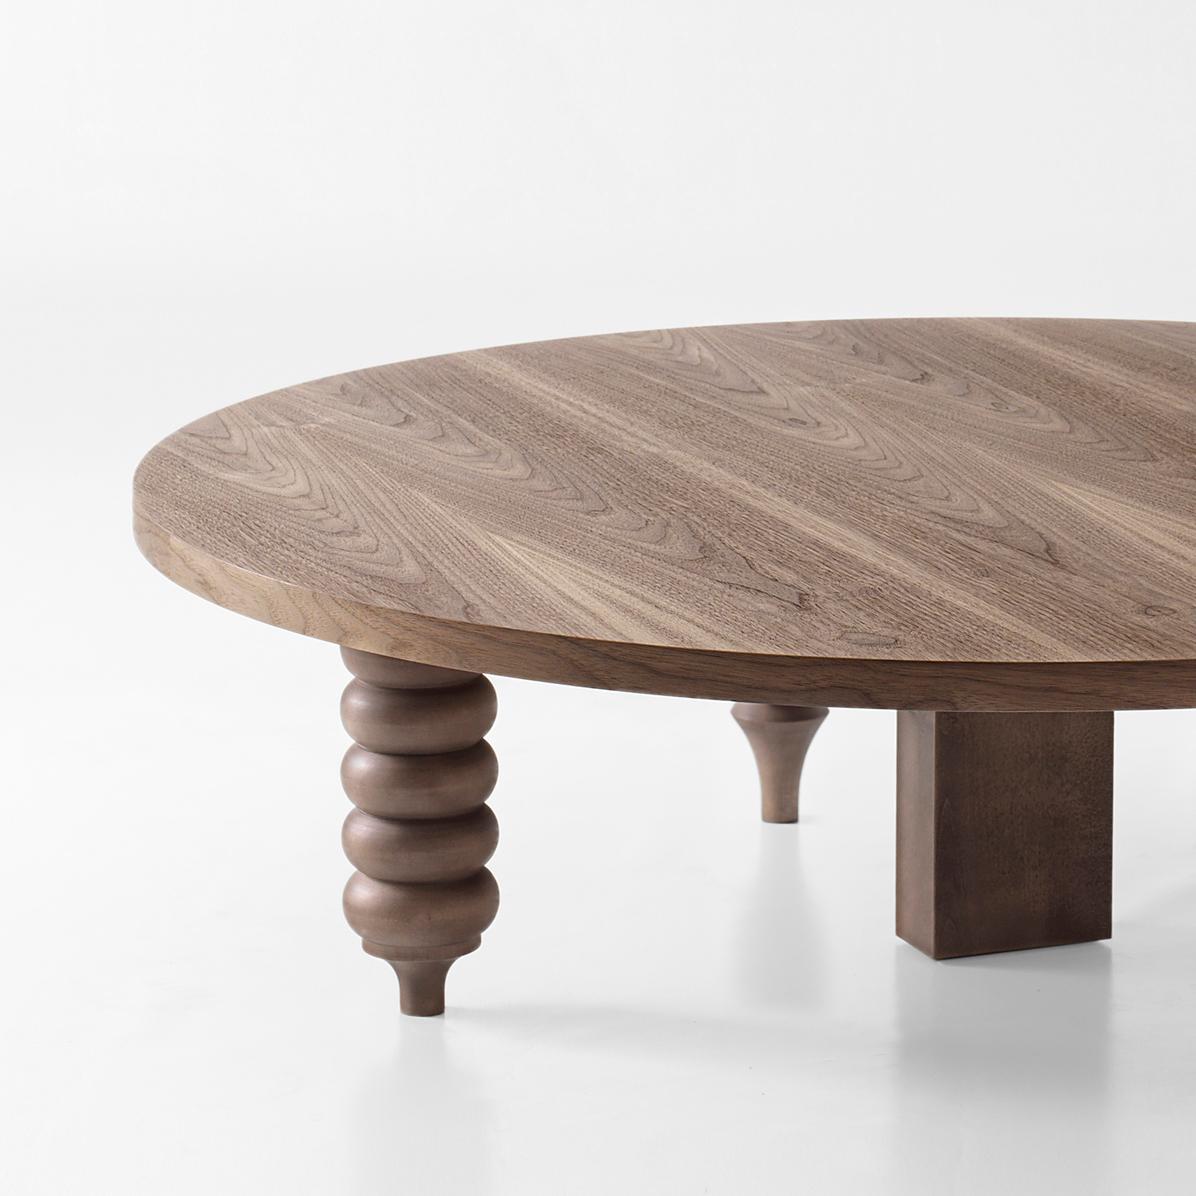 Low table designed by Jaime Hayon manufactured in Barcelona by BD

MDF base and legs in turned solid alder wood, 

Measures: Rounded table
Ø 80/120 x H 35 cm.